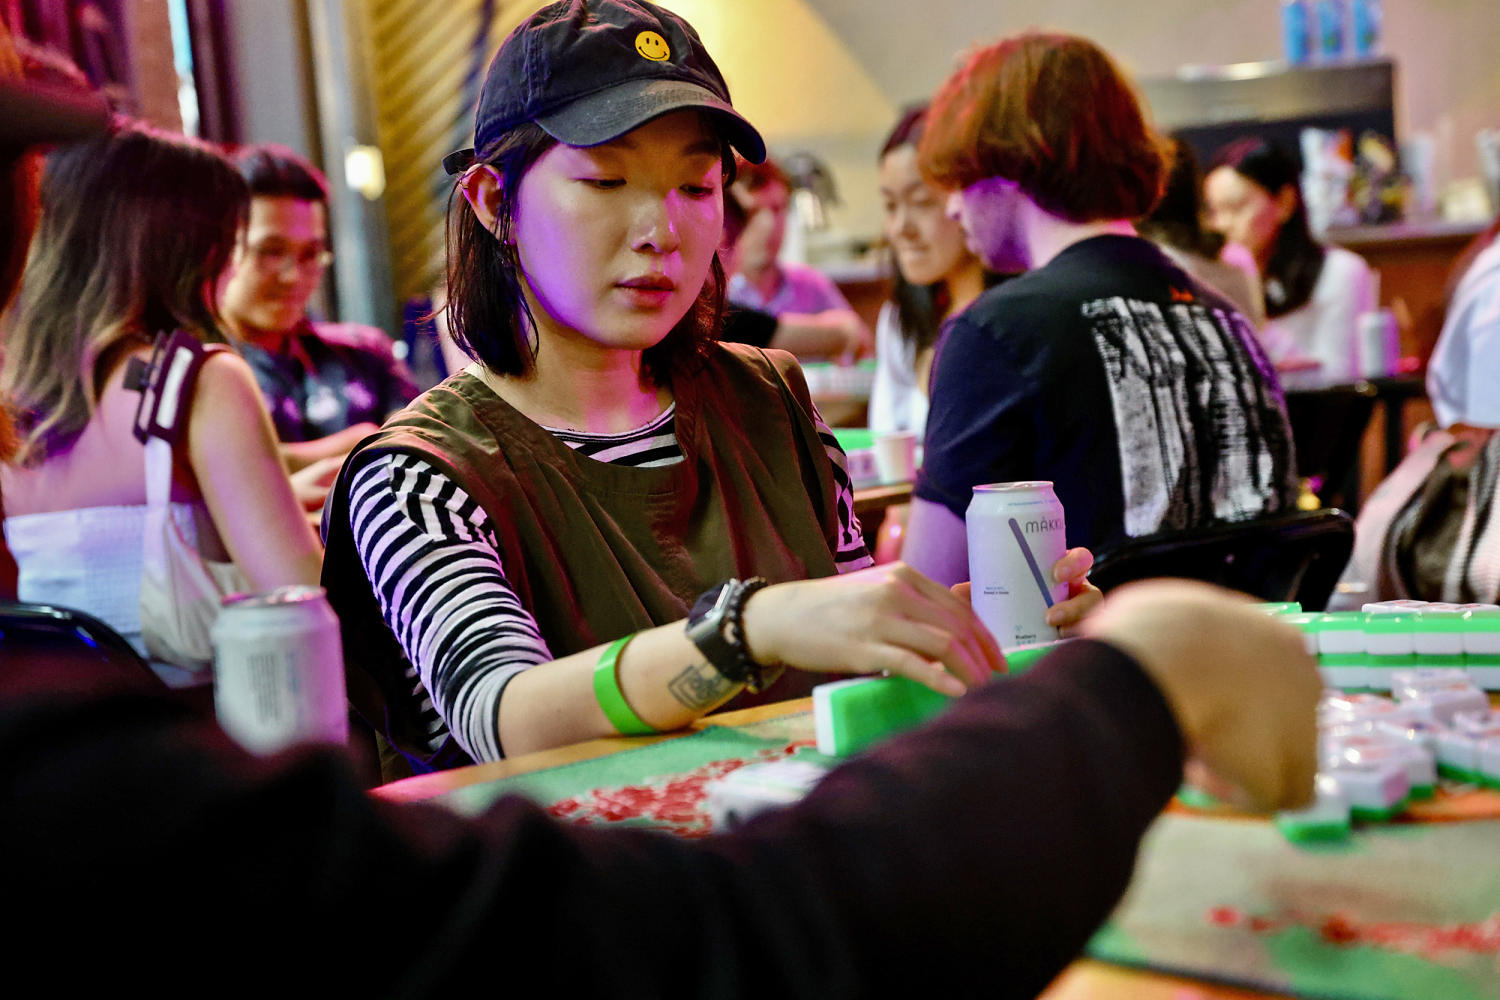 NYC's hottest social club is a mahjong tournament 